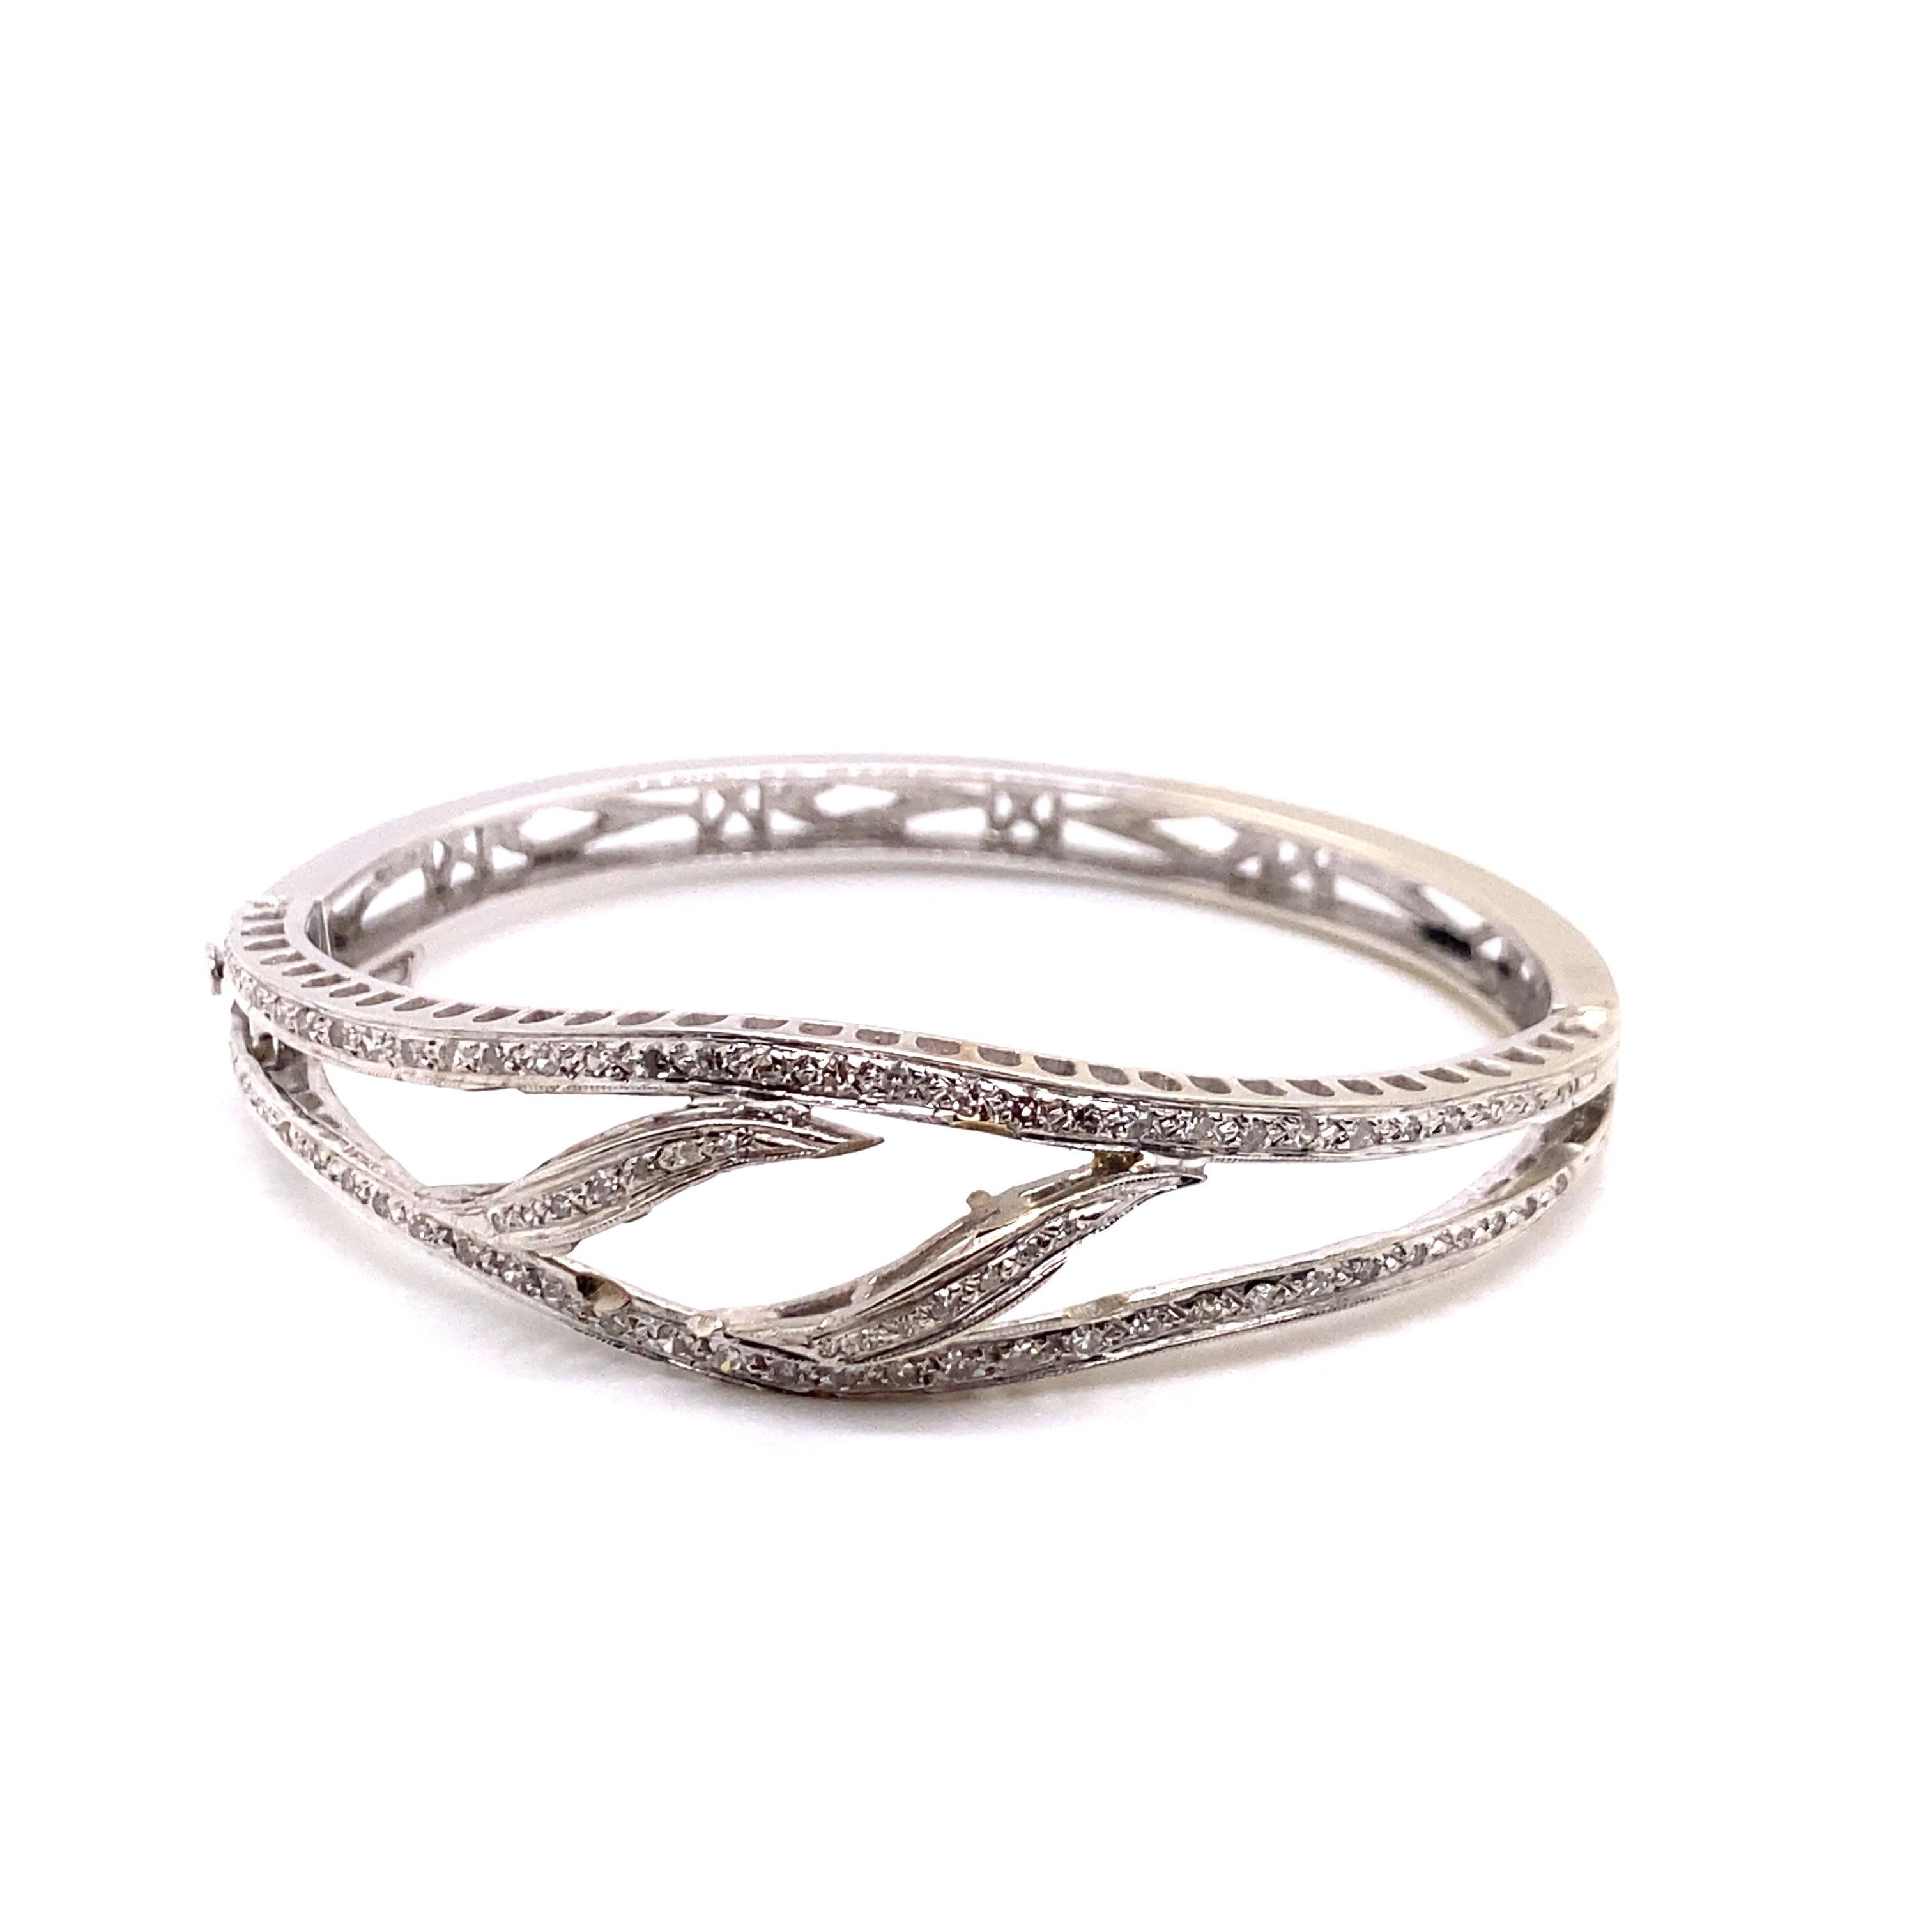 Vintage 1960's 14K White Gold 2 Row Diamond Bangle - The bangle contains 76 single cut diamonds with a total approximate weight of 1.00ct. The width of the bangle in the center is 15.7mm and tapers down to 5.6mm on the bottom. The inside diameter is